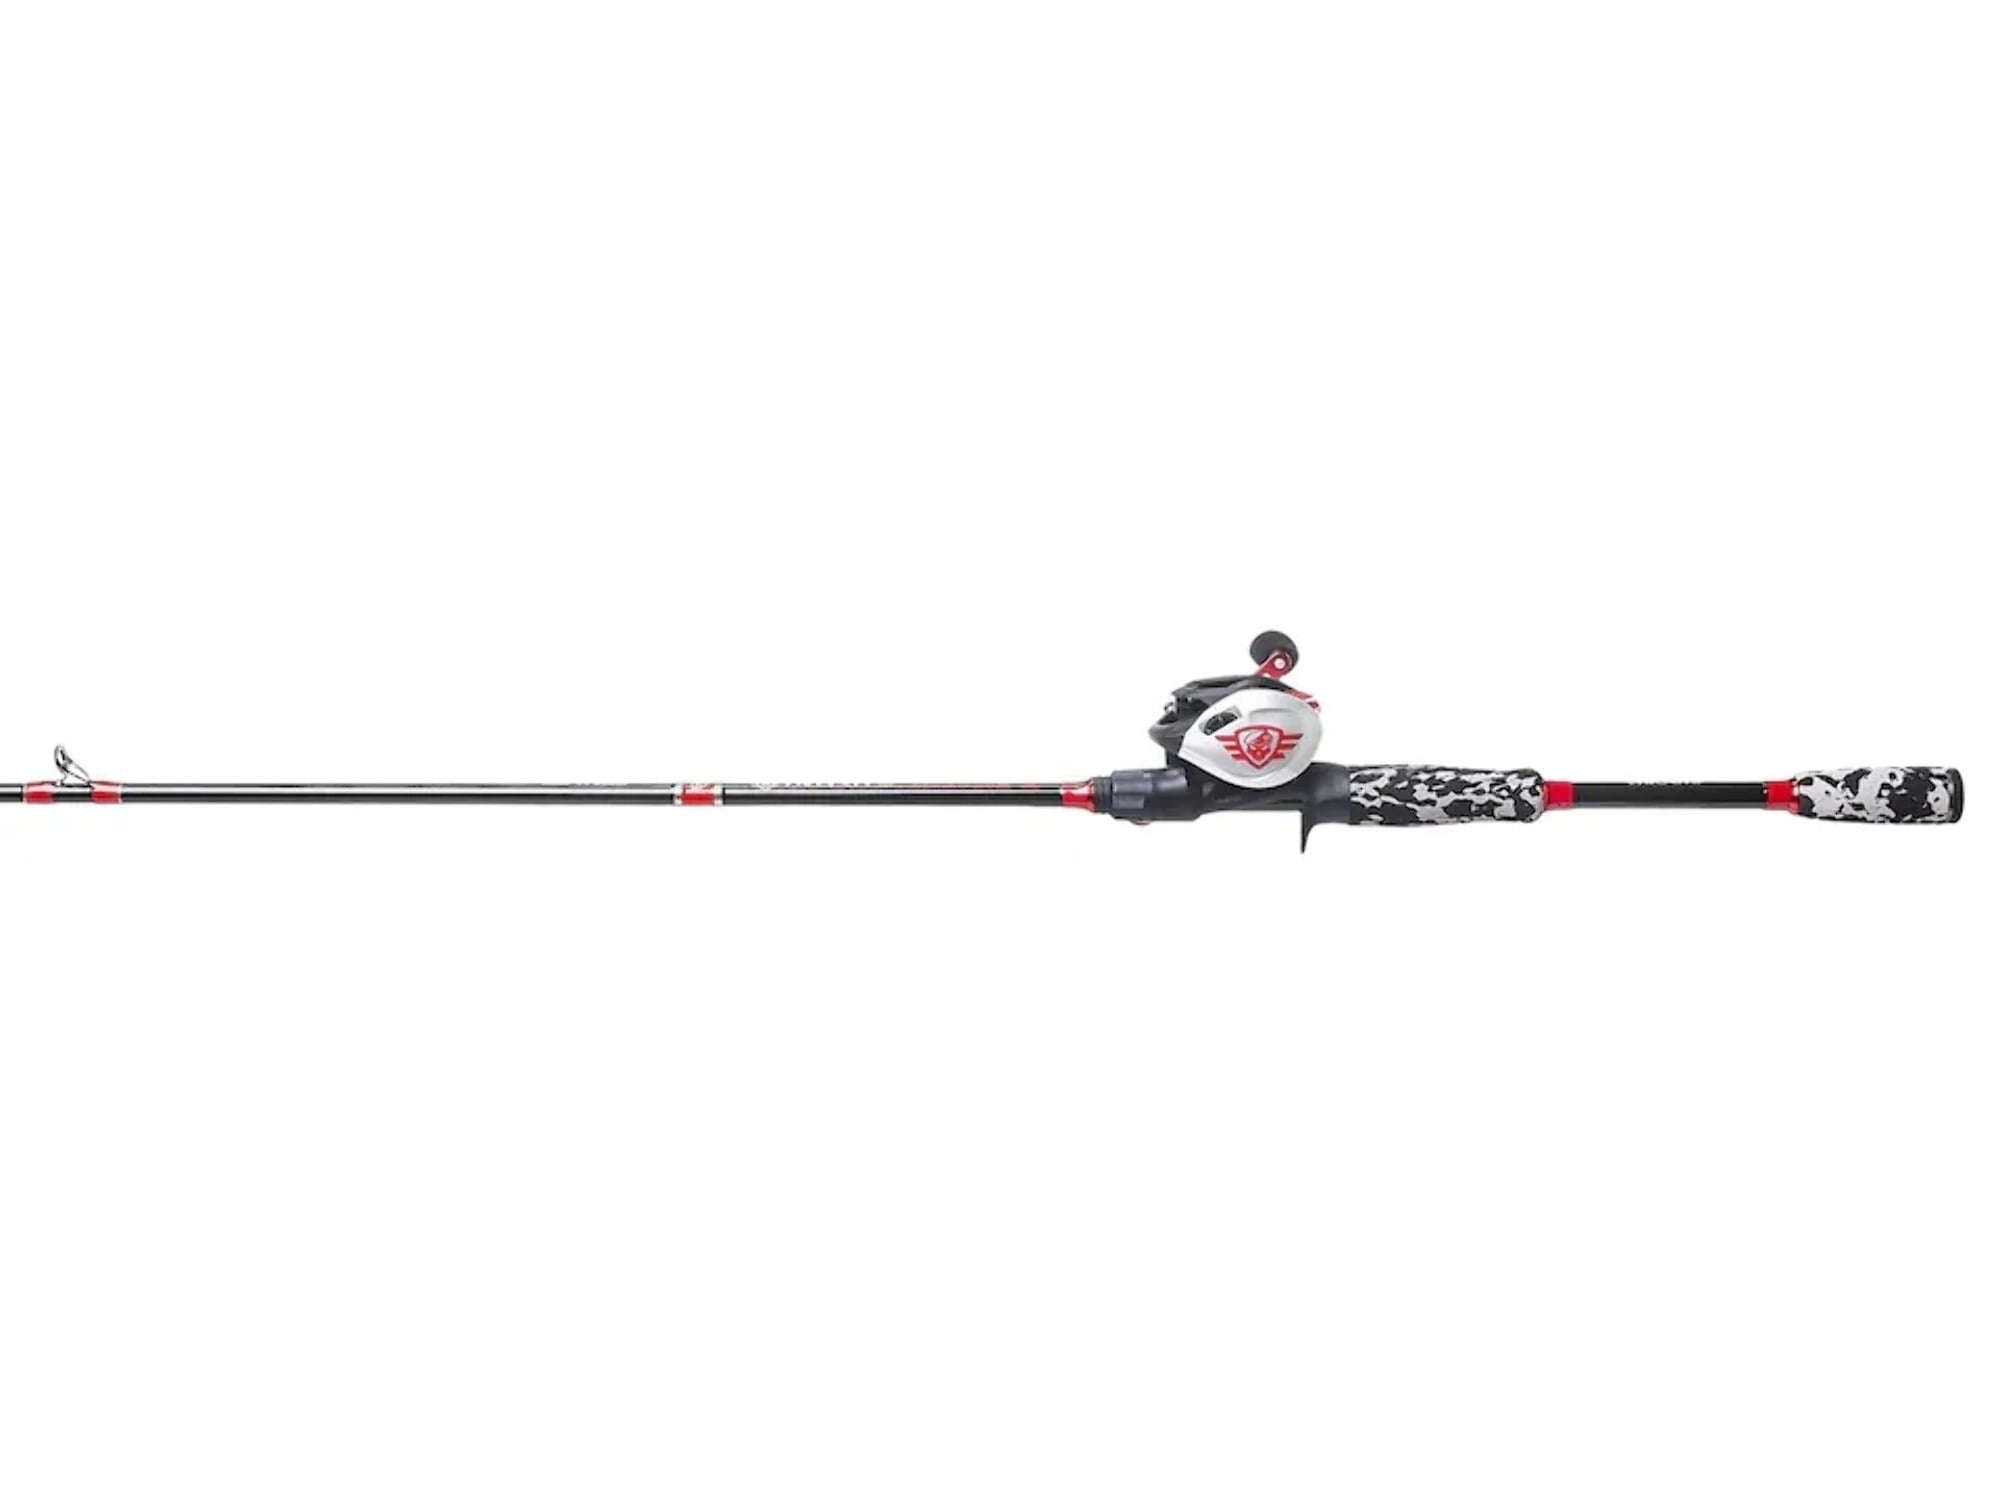 Favorite Fishing 7 ft. 2 Piece Army Right Hand Casting Rod & Reel Combo